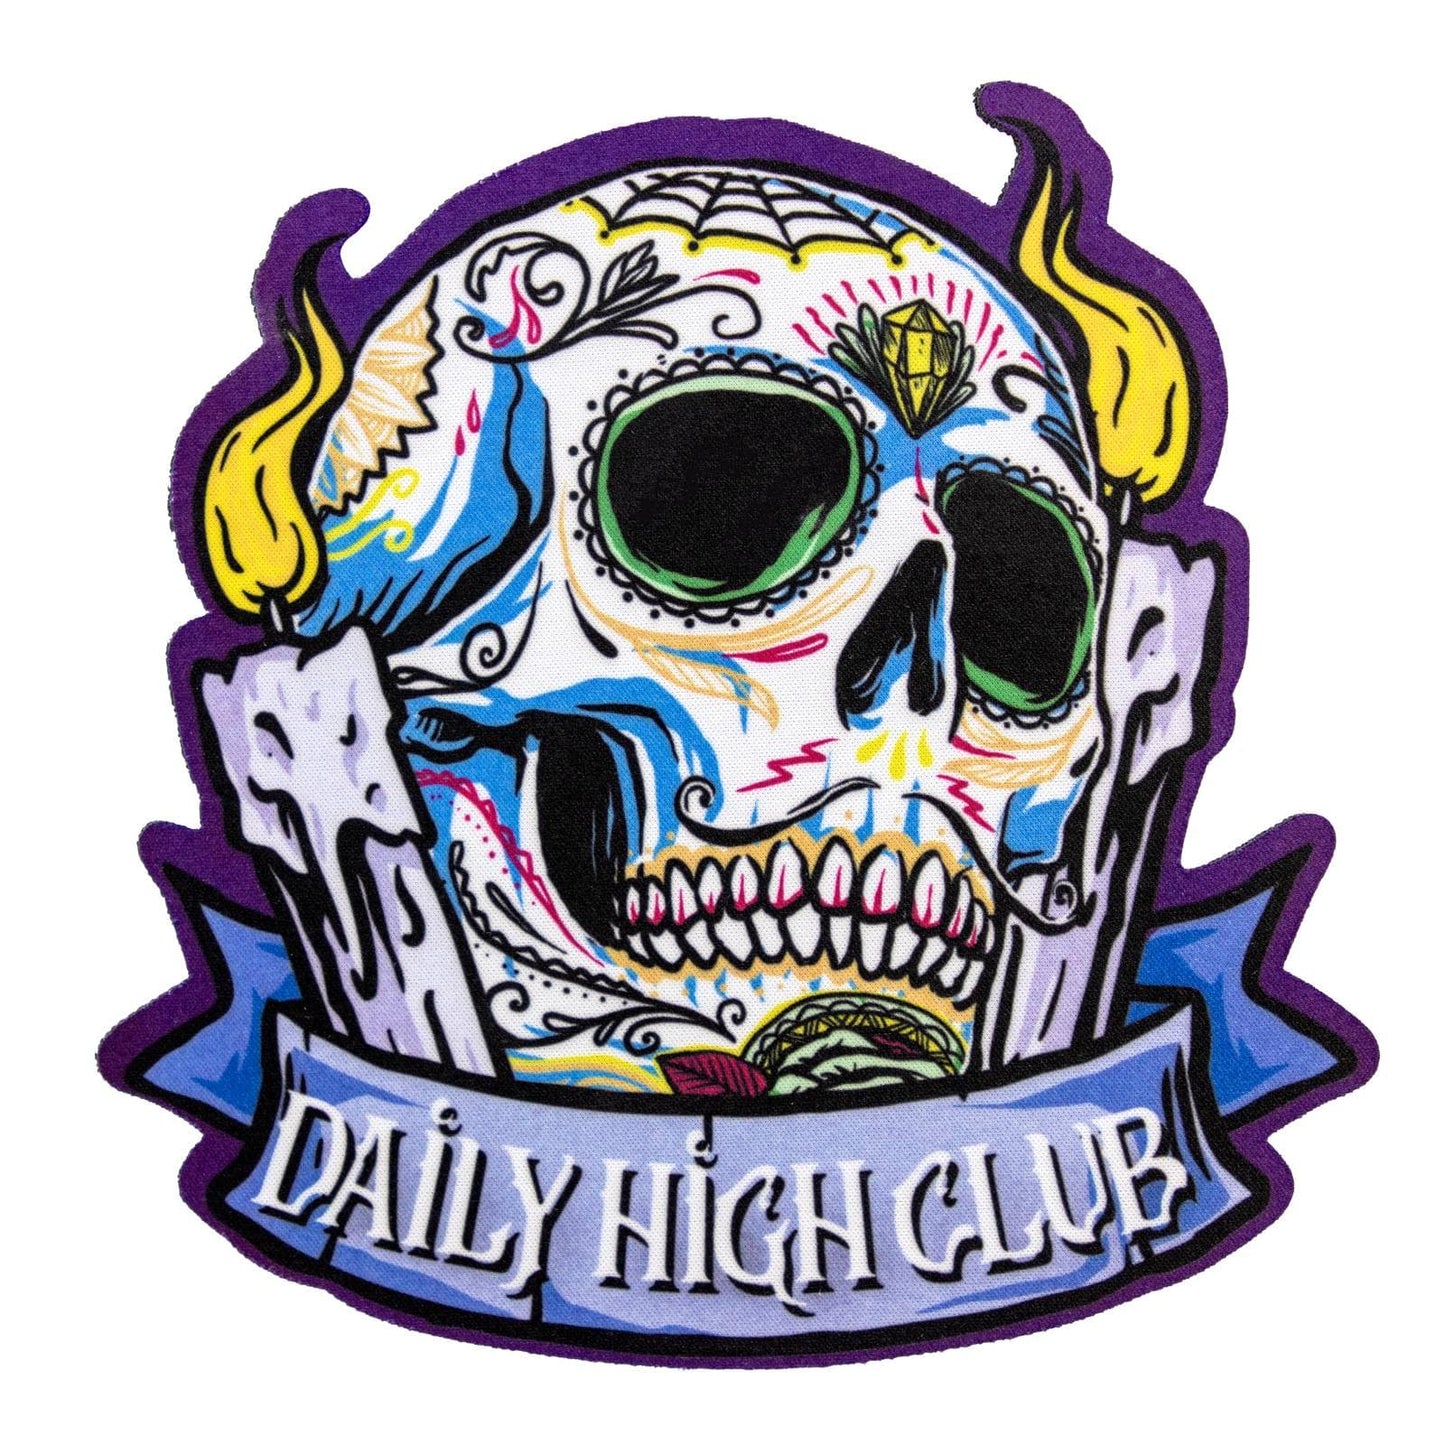 Daily High Club Skull Dab Mat for October